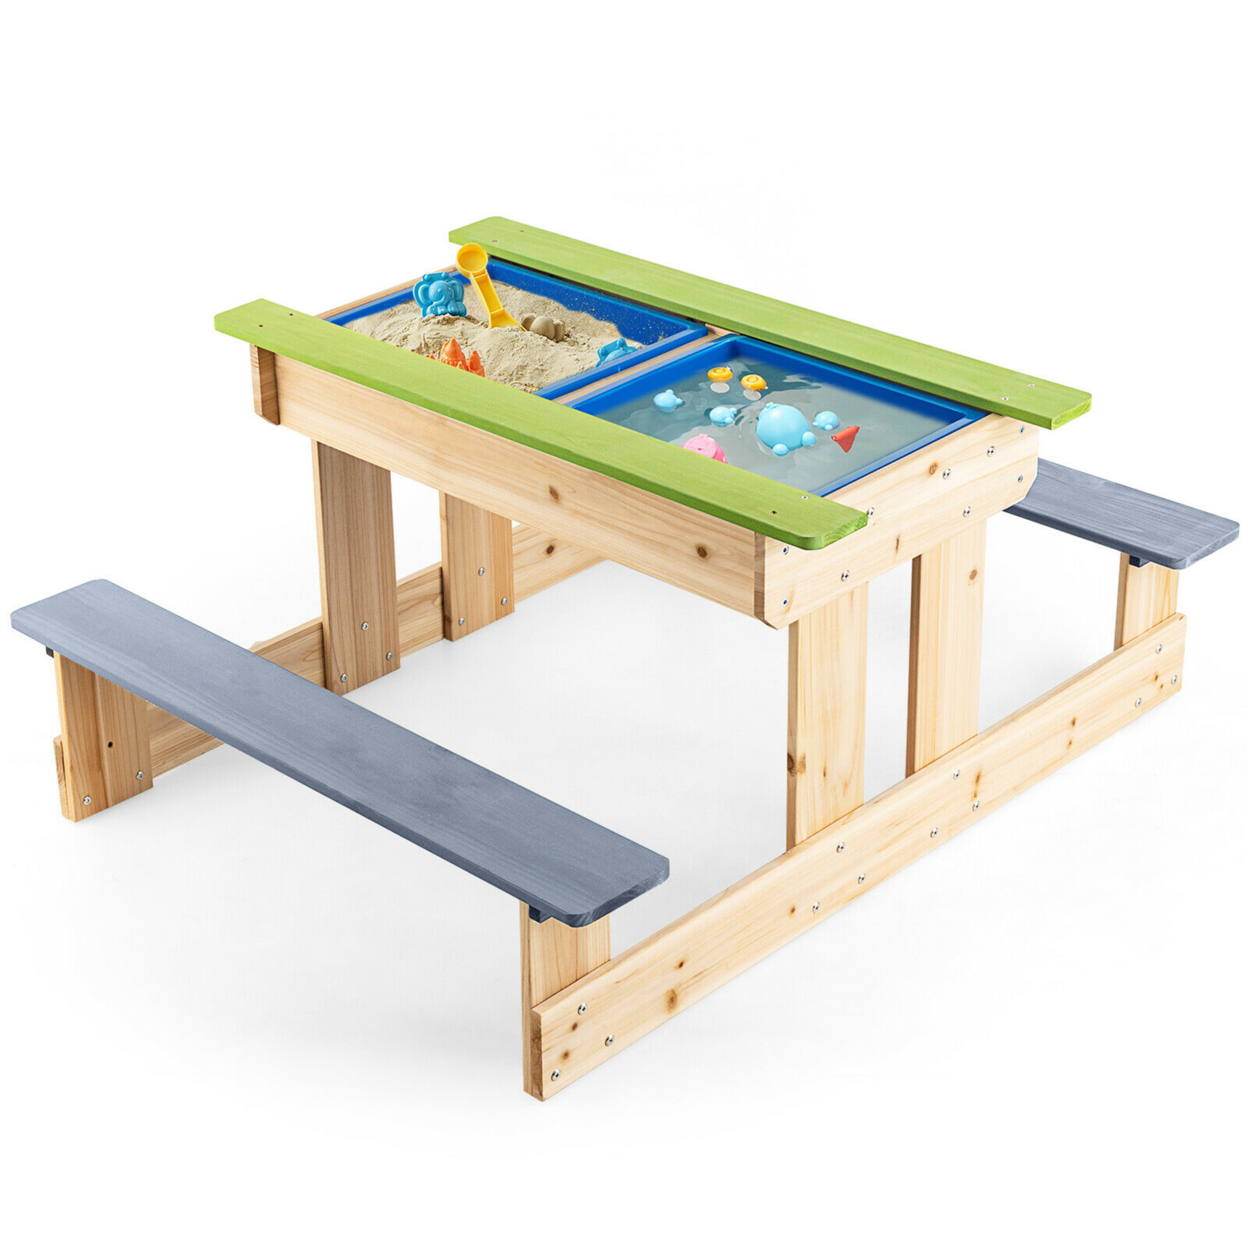 3-in-1 Kids Picnic Table Outdoor Wooden Water Sand Table W/ Play Boxes